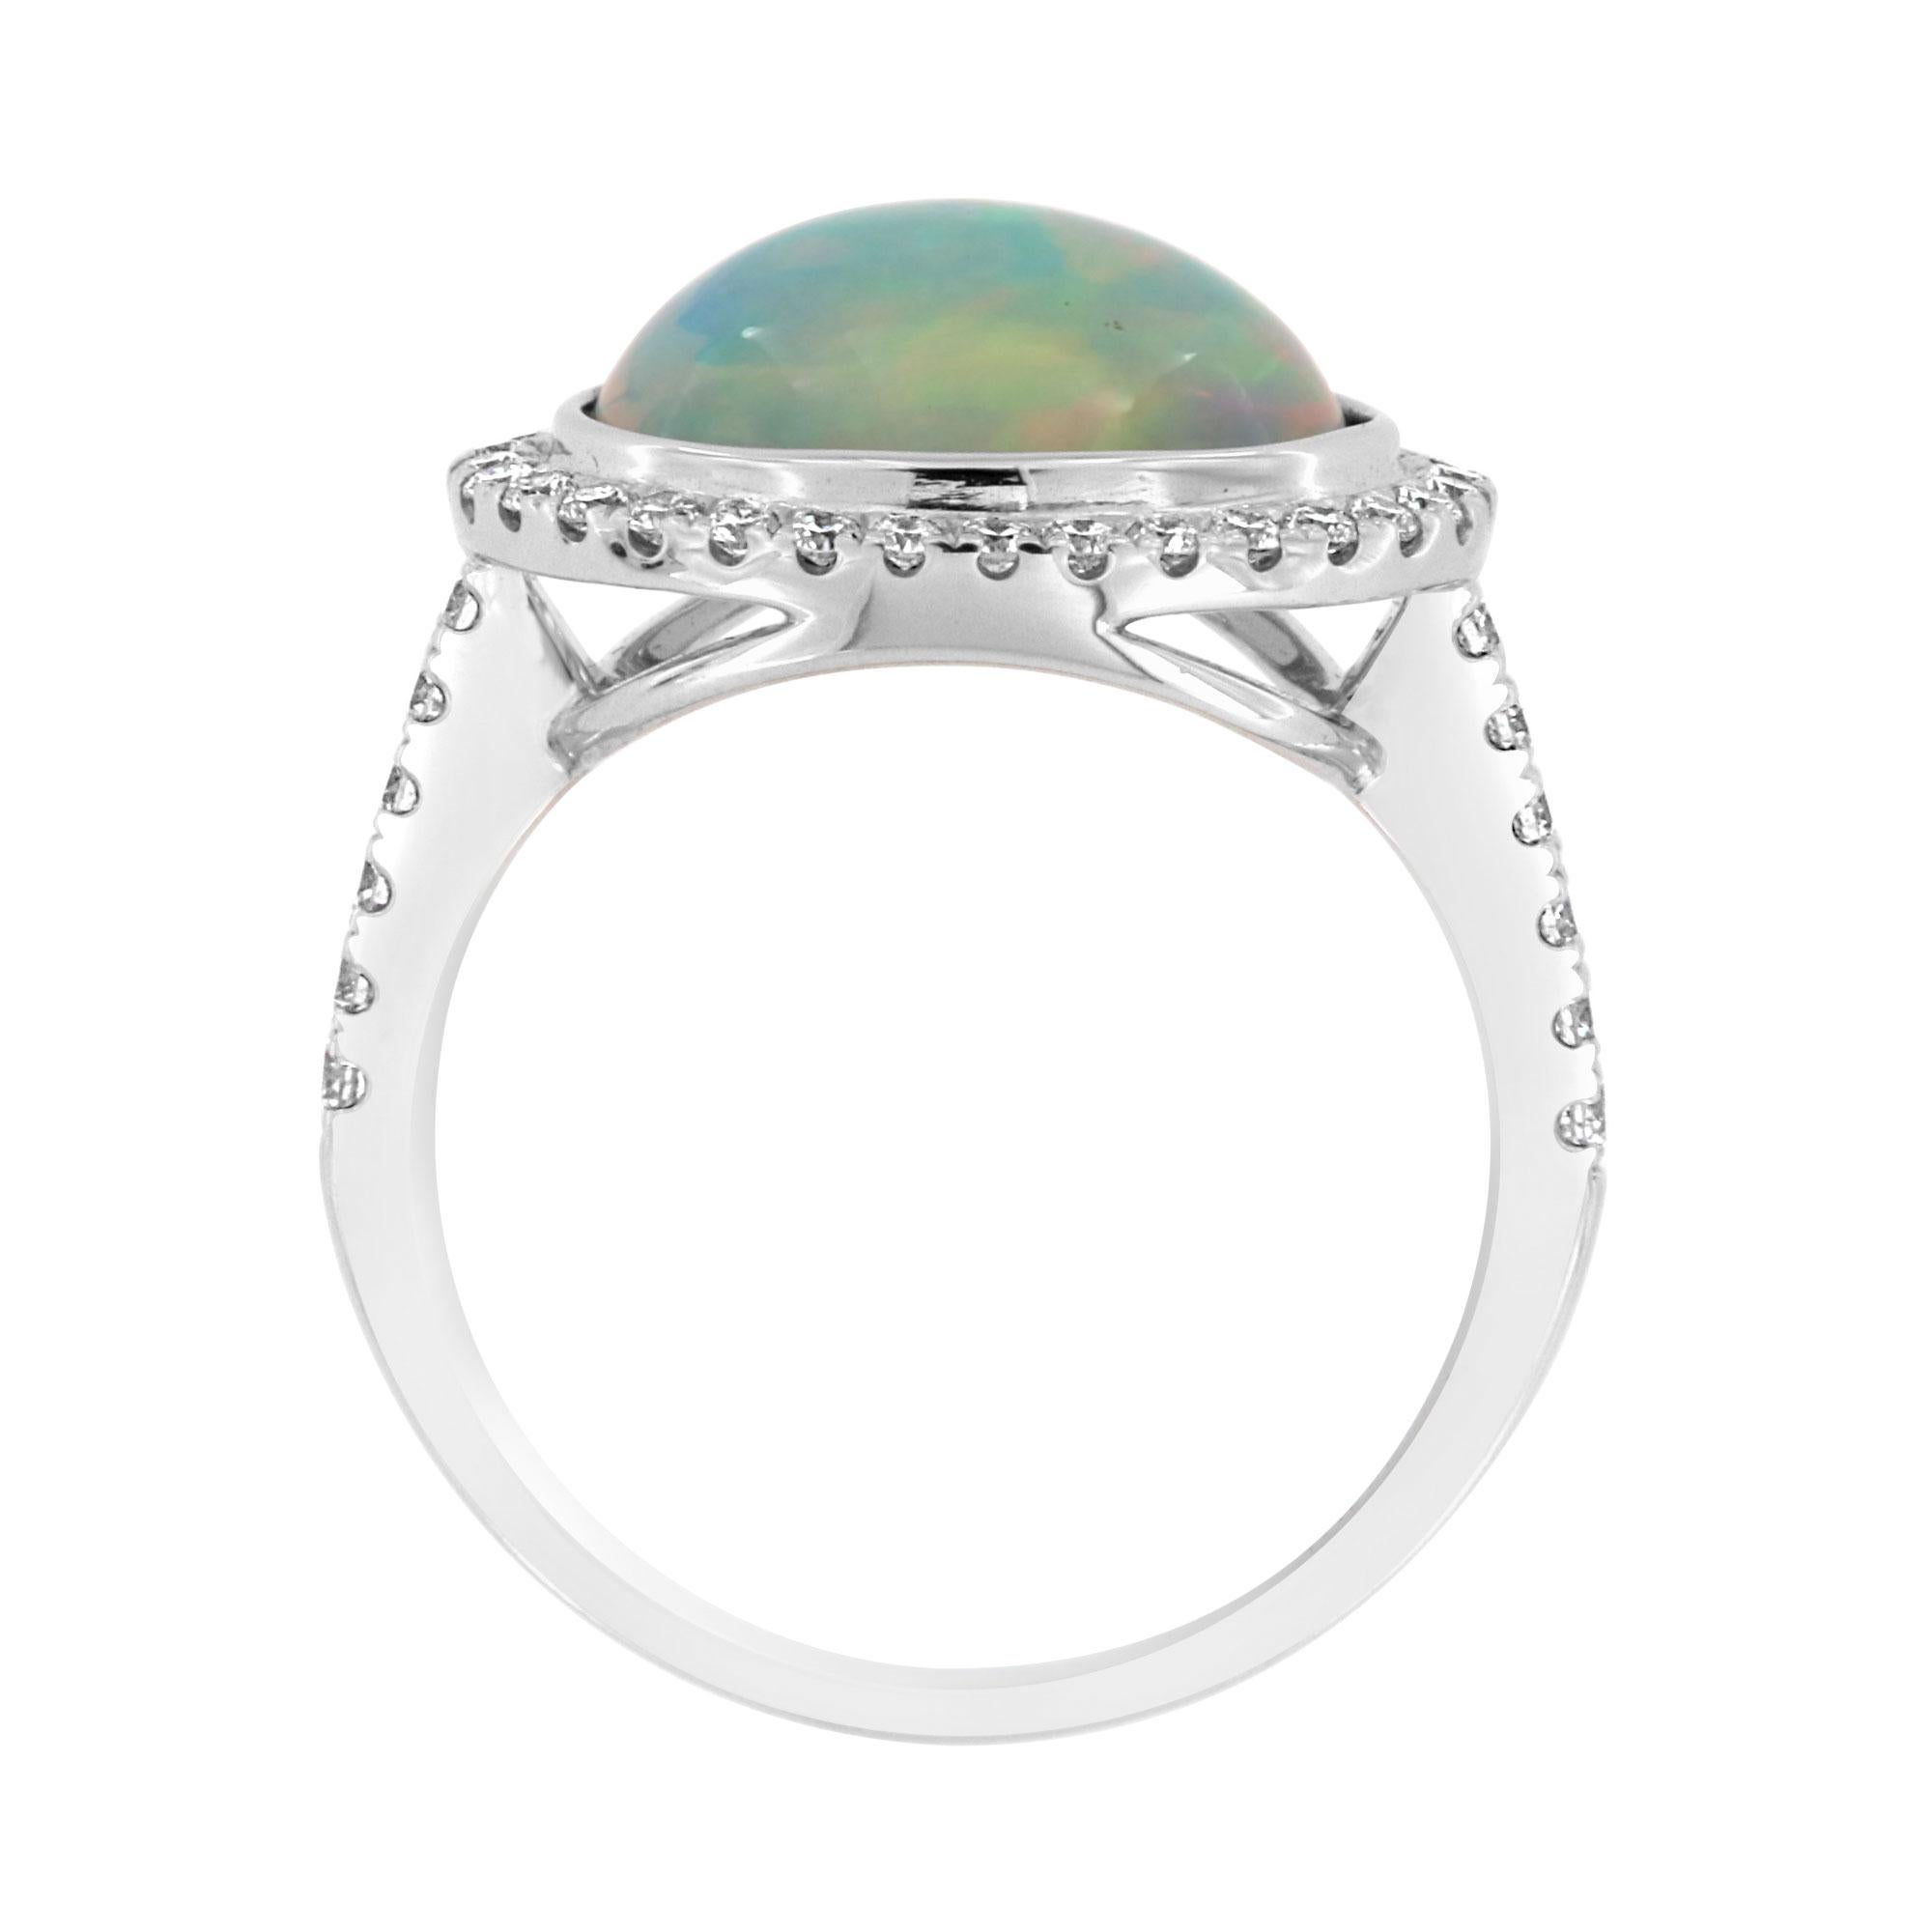 This colorful opal and diamond ring features an oval opal framed by Micro prong round brilliant diamonds in 18k white gold. Experience the Difference!

Product details: 

Center Gemstone Type: Opal
Center Gemstone Carat Weight: 2.79
Center Gemstone